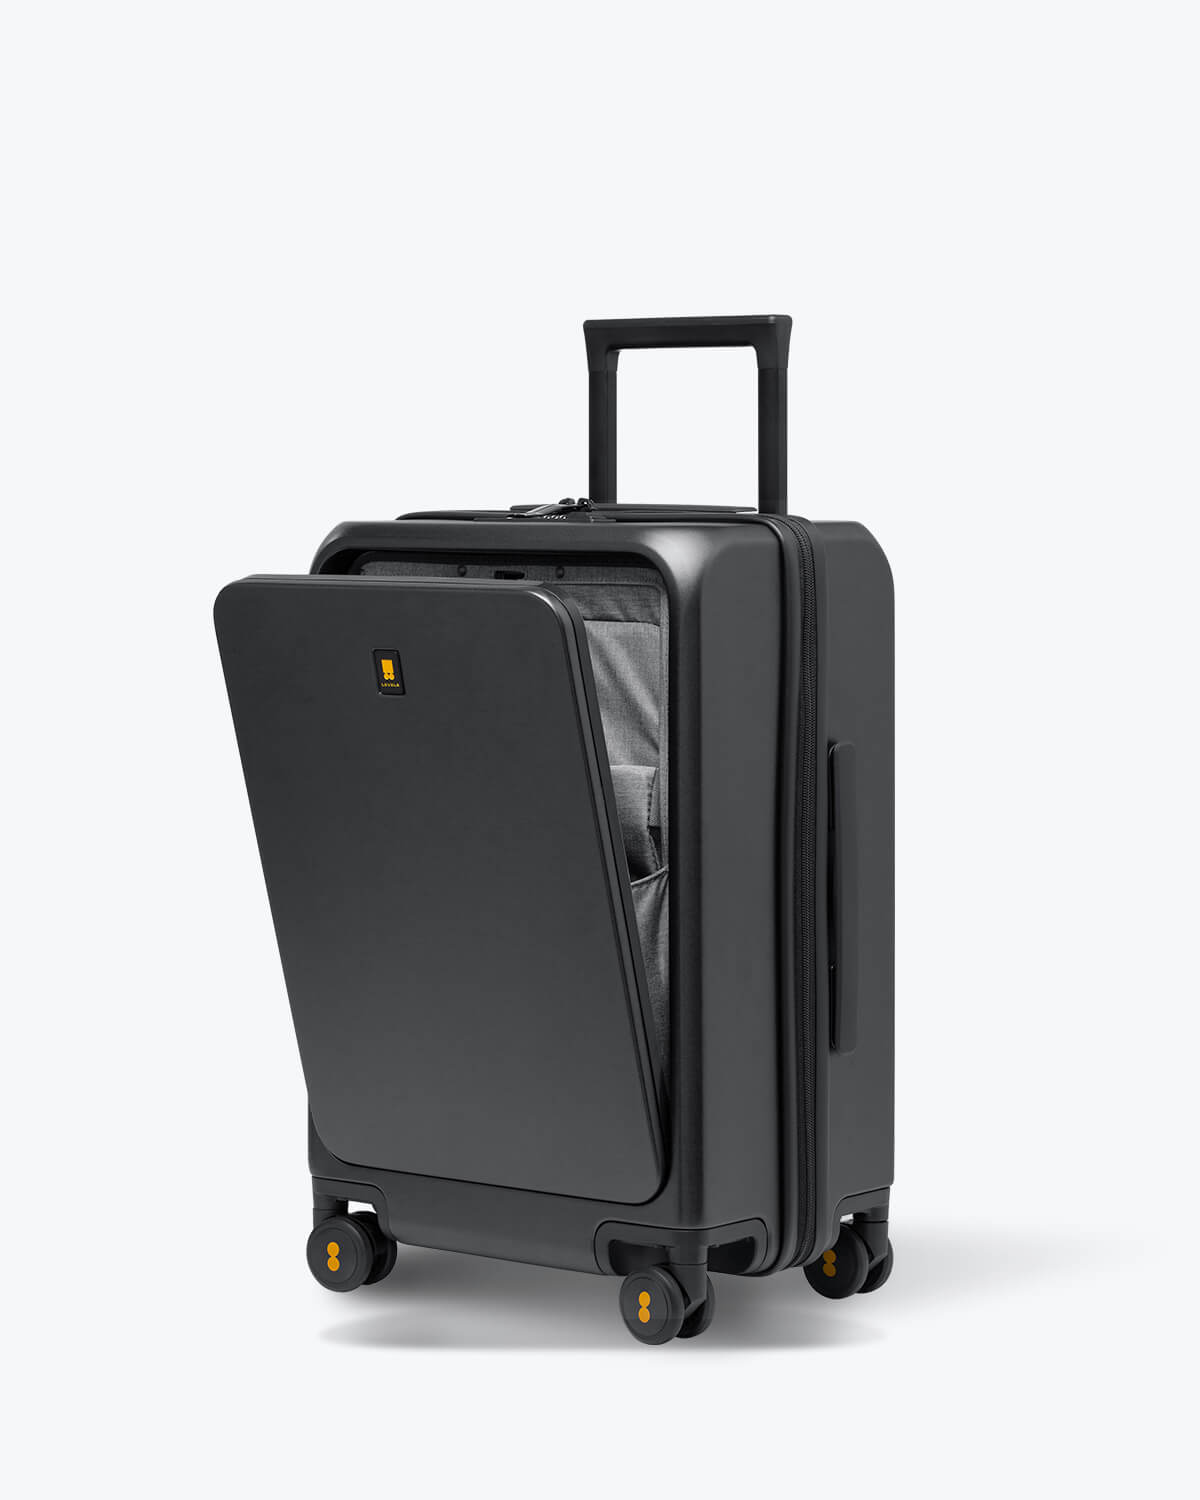 Level8 Pro Carry-On for business travelers